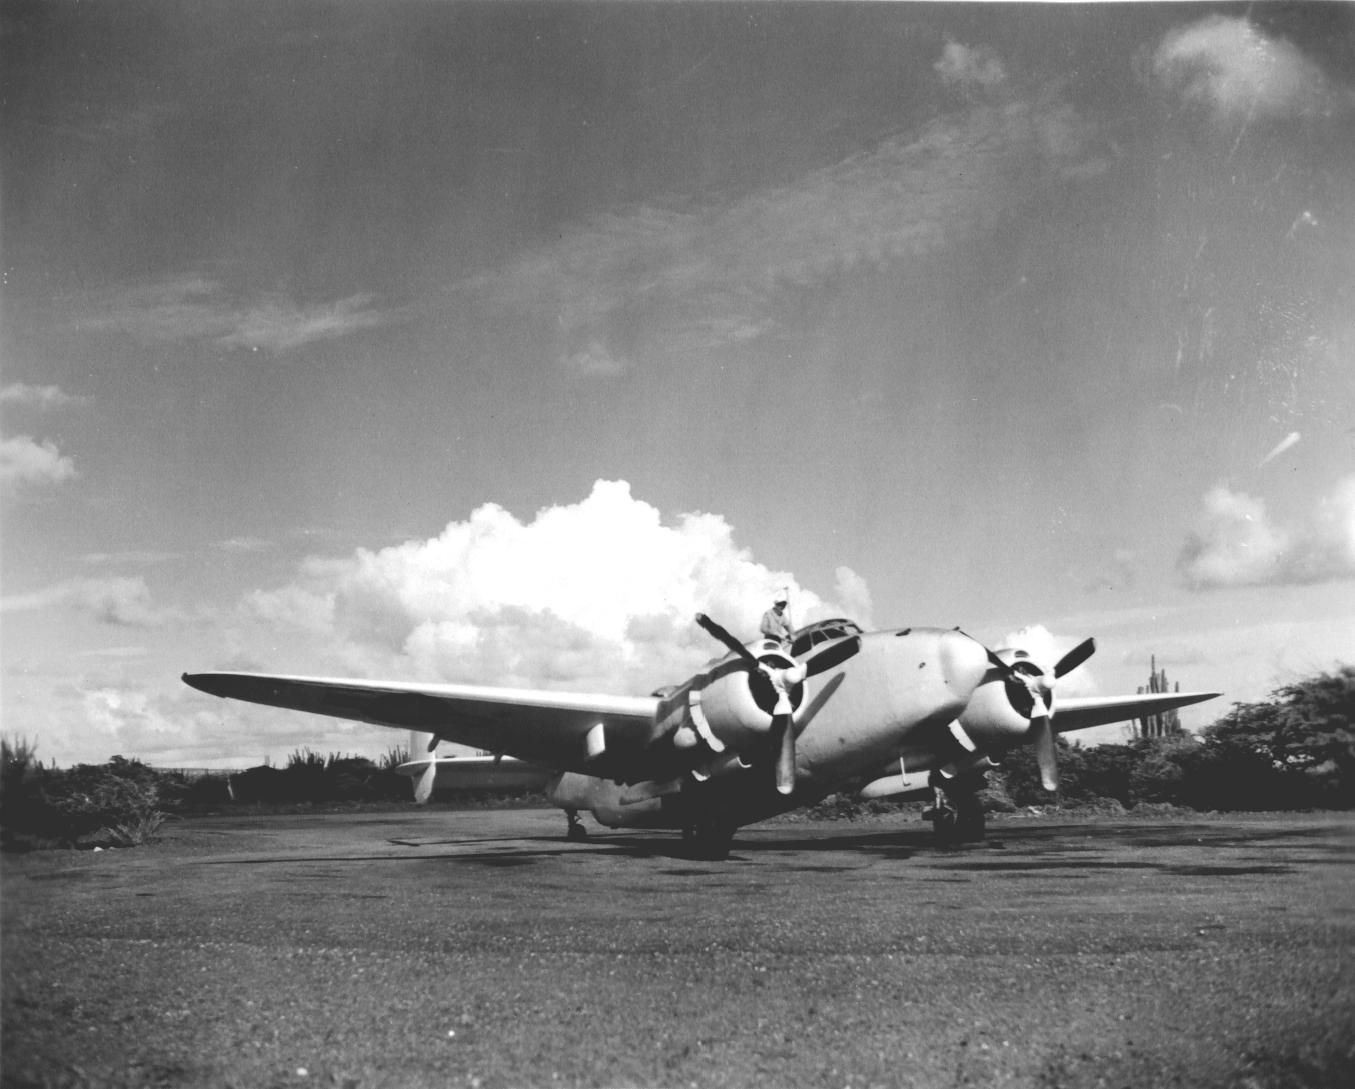 US Navy sailor performing routine maintenance on a PV-1 Ventura aircraft of squadron VB-141 at Hato Field, Curaçao, Netherlands West Indies, Nov 1943